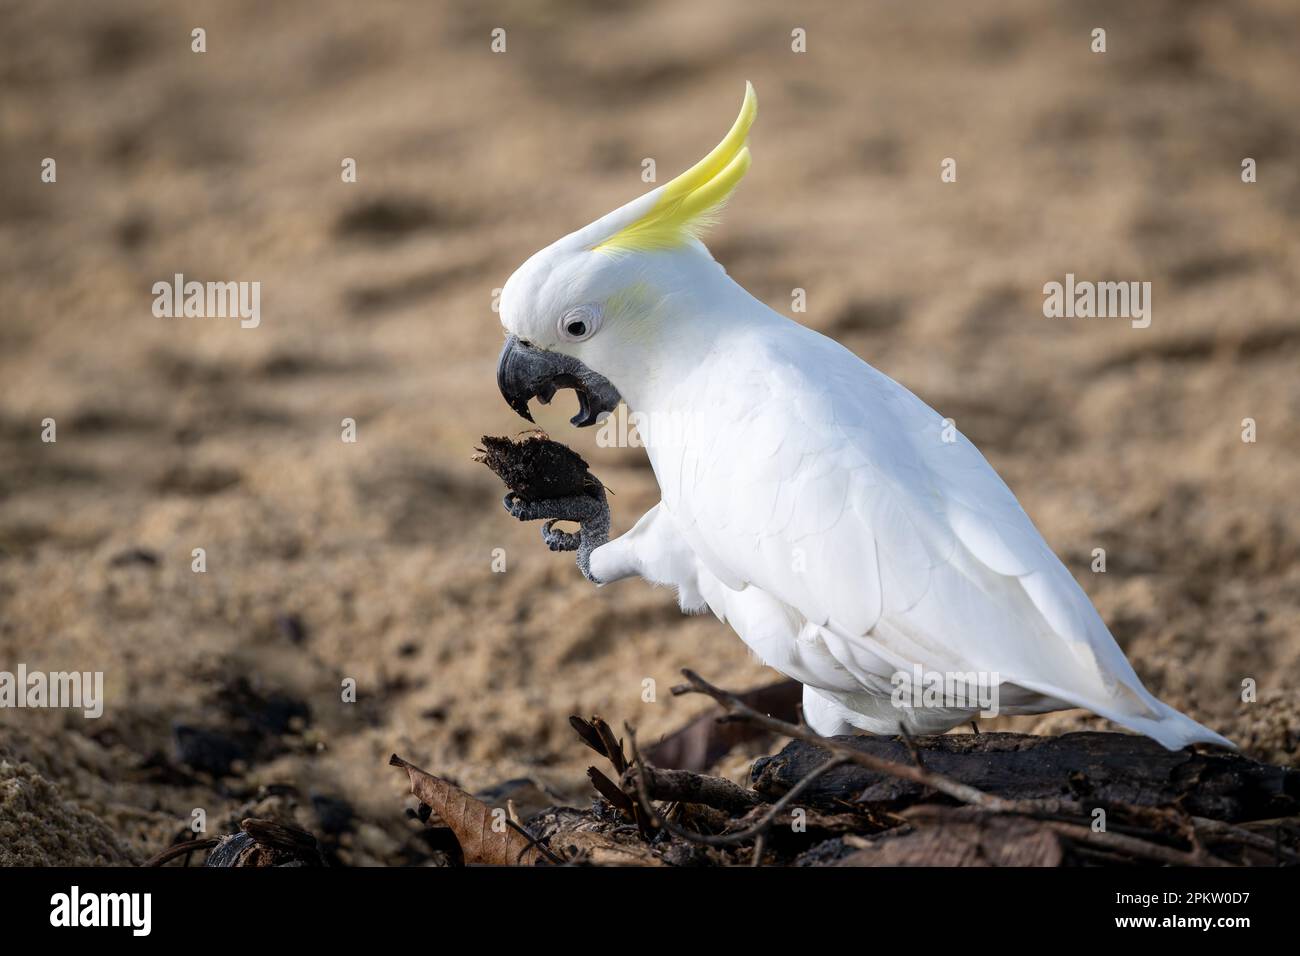 A single Sulphur-crested Cockatoo sits on the Palm Cove sand in Cairns, about to crack open the beach almond nut clasped in a claw with its open beak. Stock Photo